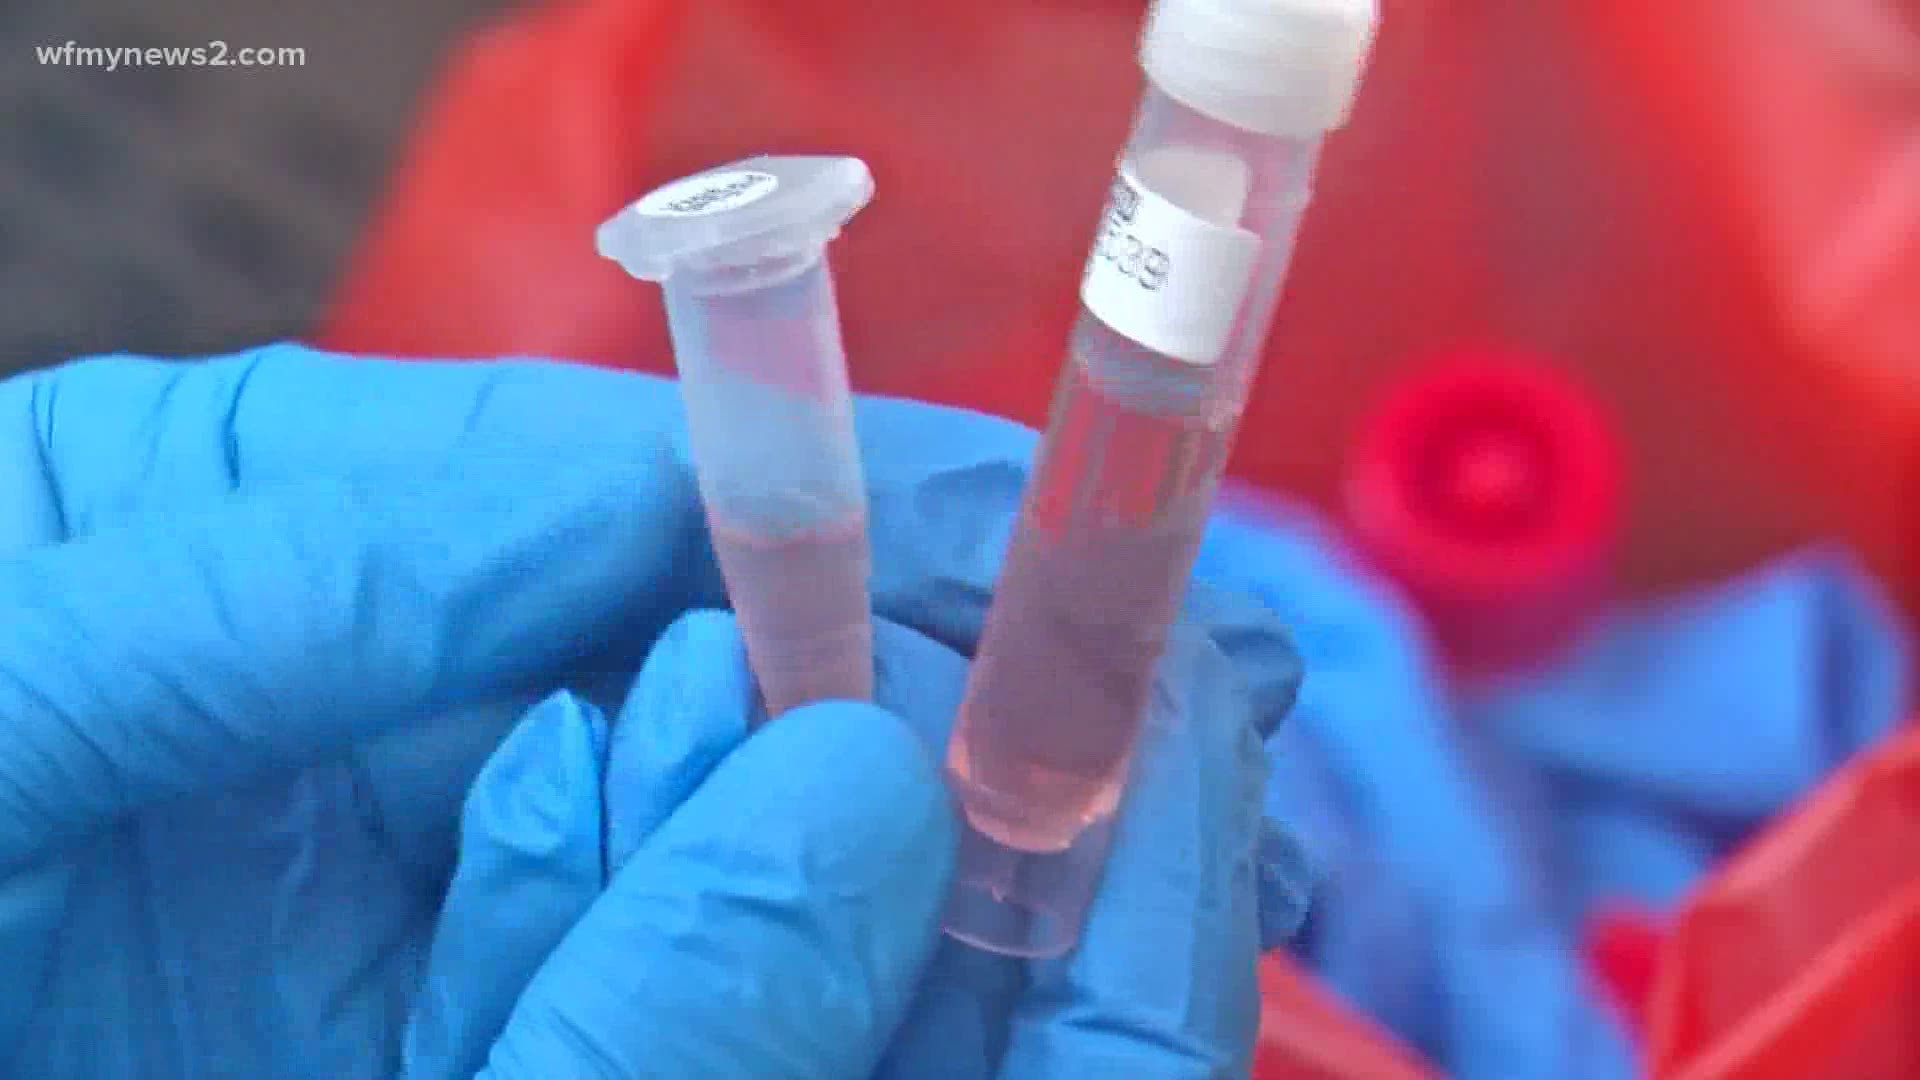 Groups gathered on beaches and other places during the July 4 weekend, and experts say that means a lot of folks will want a coronavirus test.